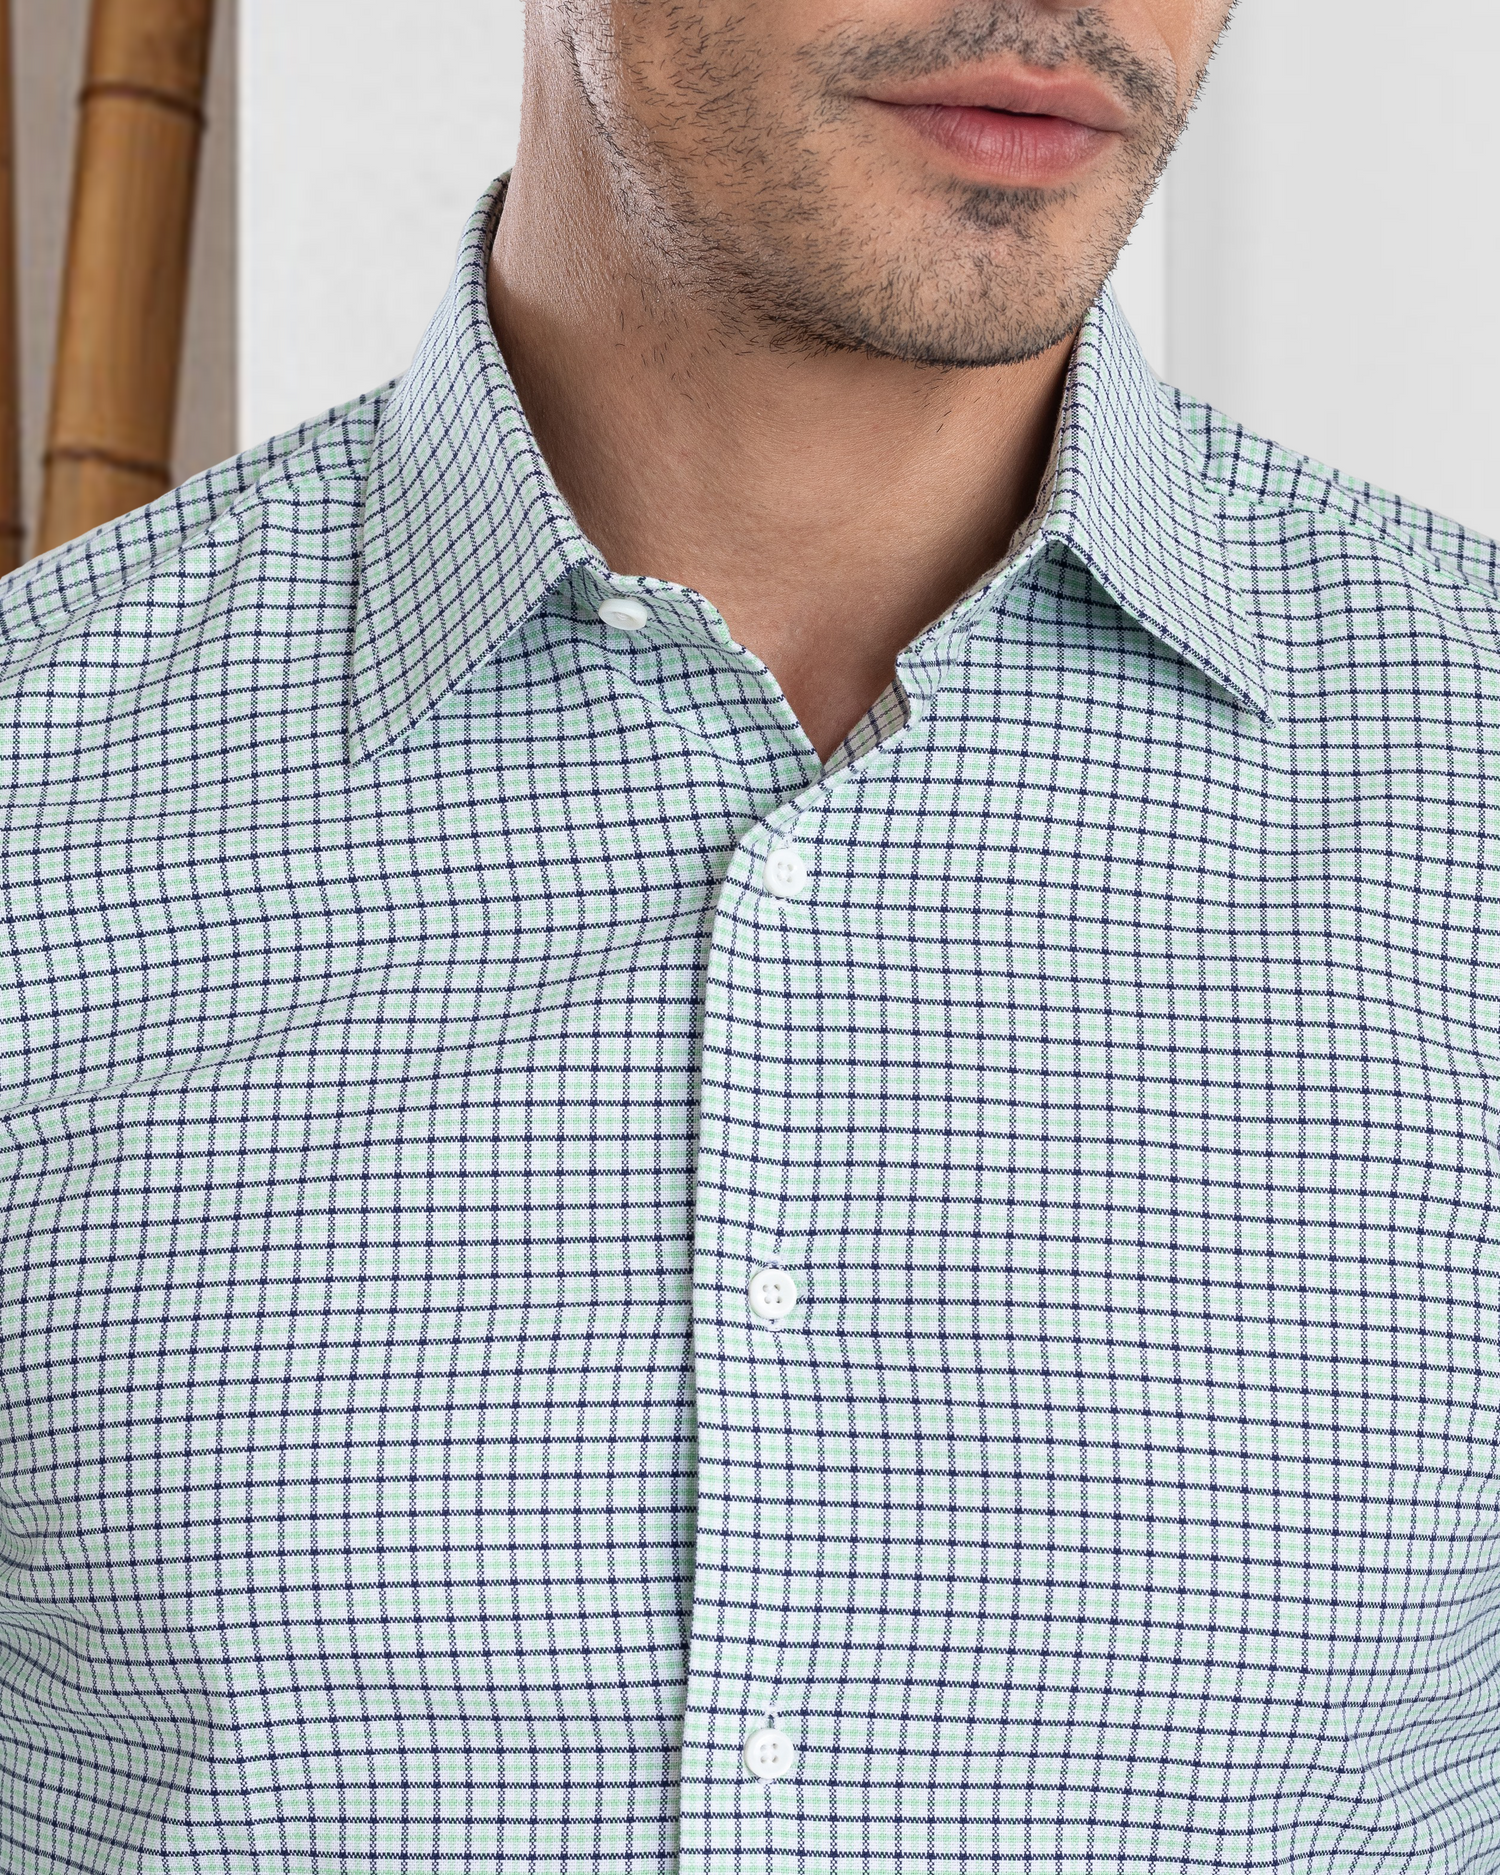 Model close up wearing custom check shirts for men by Luxire in green blue tattersall